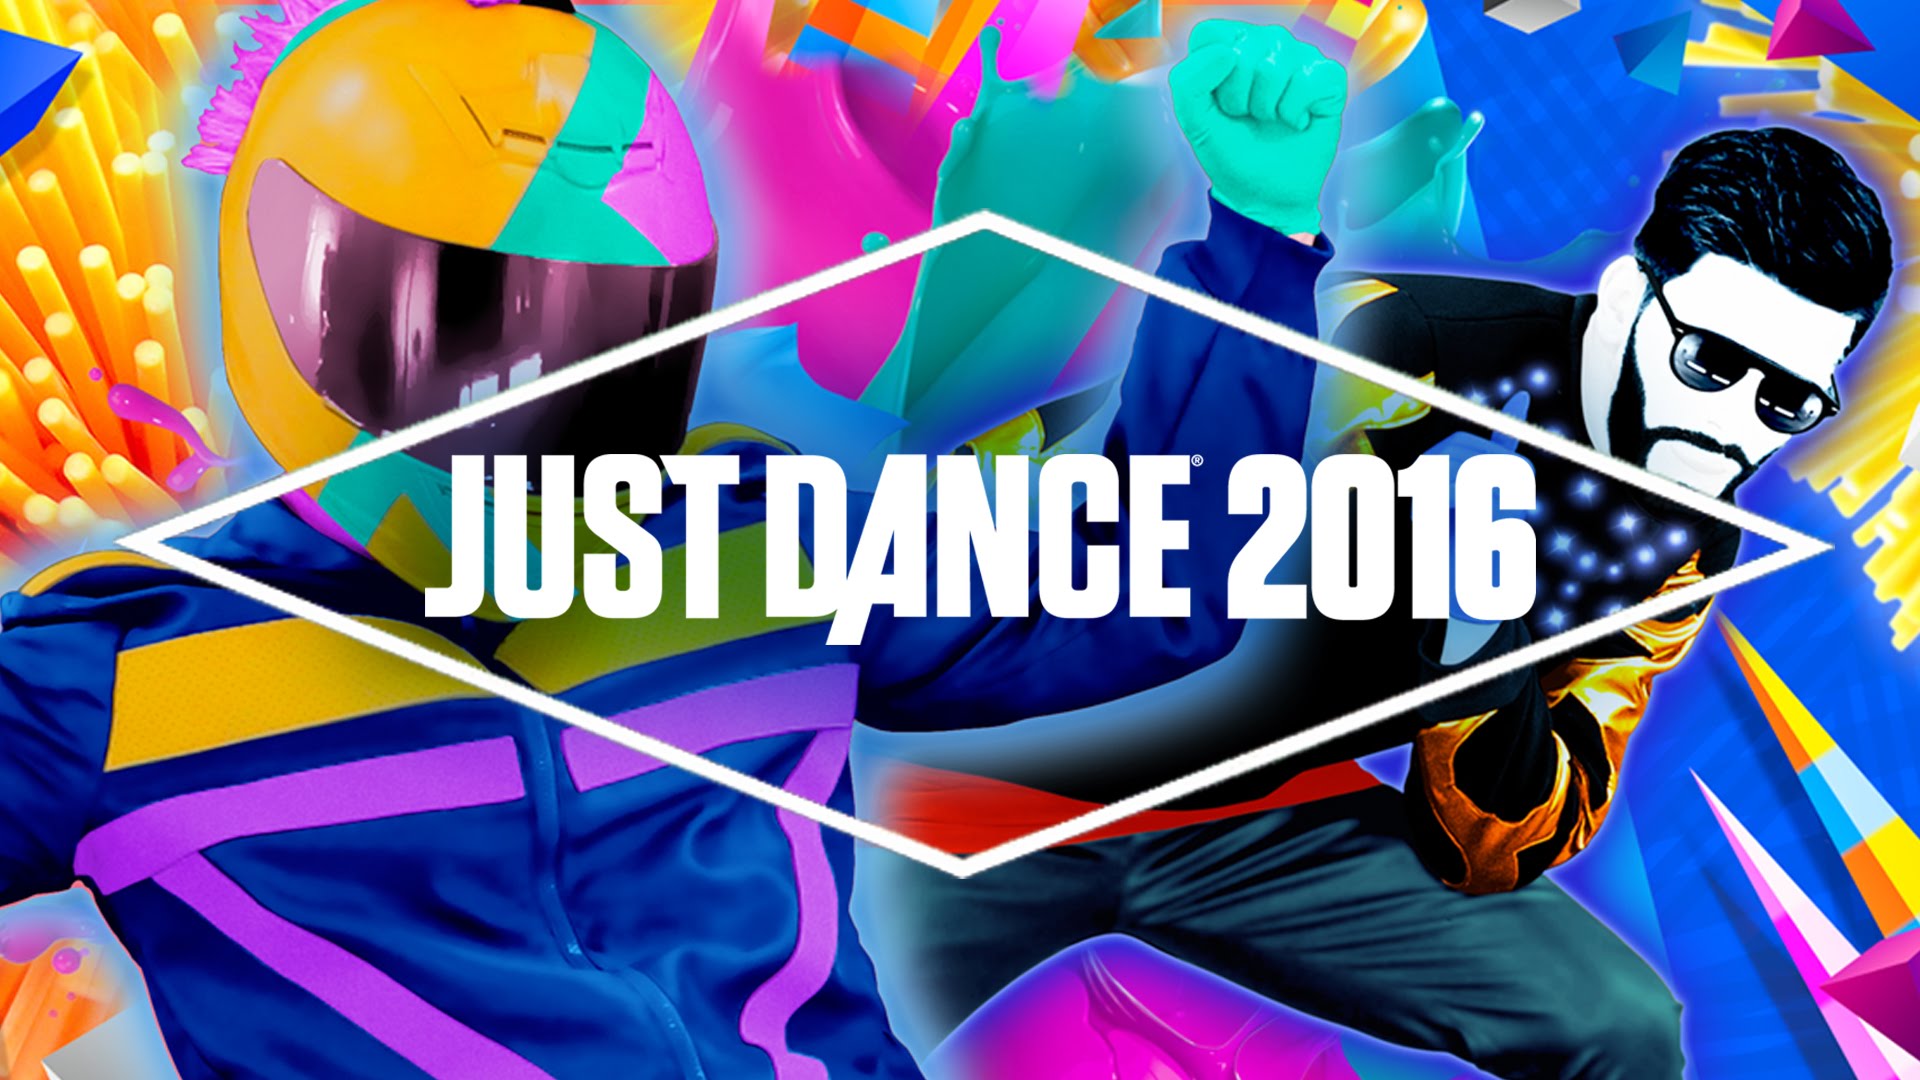 This is just a game. Just Dance 2016. Just Dance 2016 (Xbox one) обложка. Джаст дэнс НАУ. Just Dance 2016 (Xbox one) Скриншот.